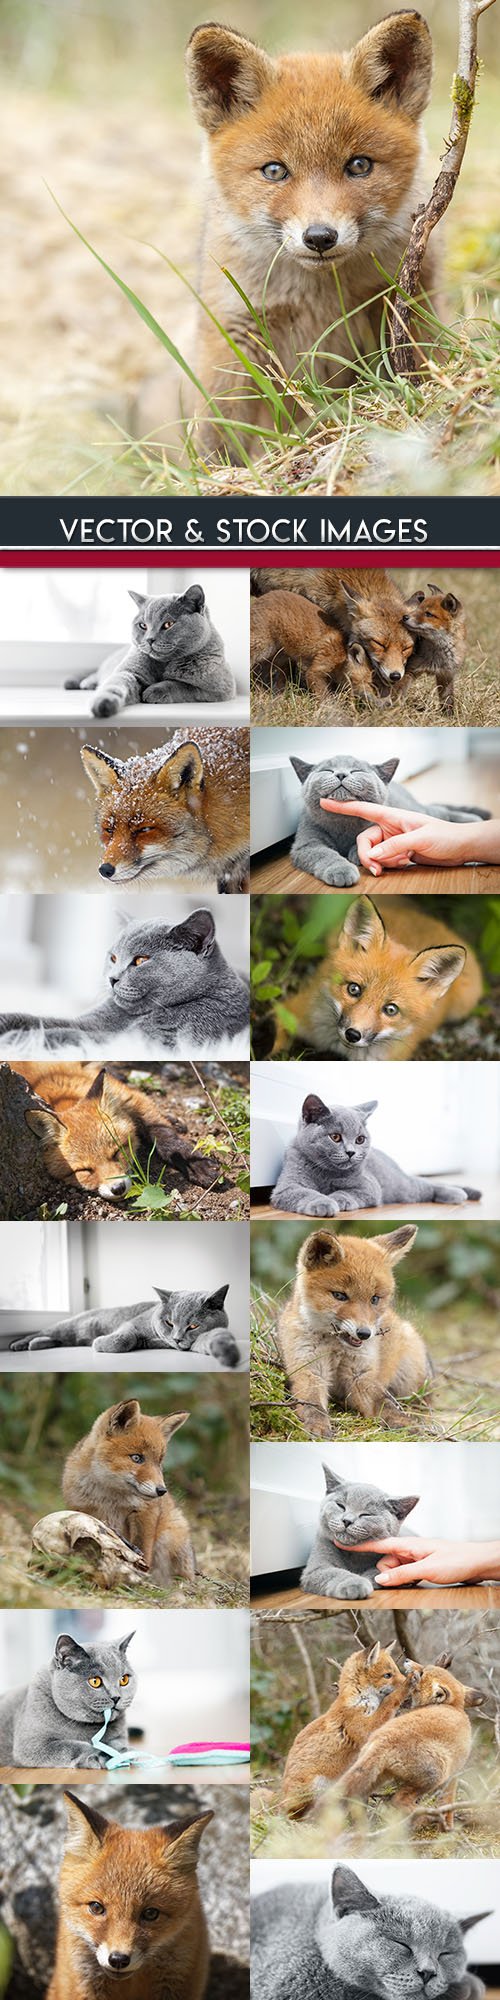 Grey British kitten and red fox with foxes